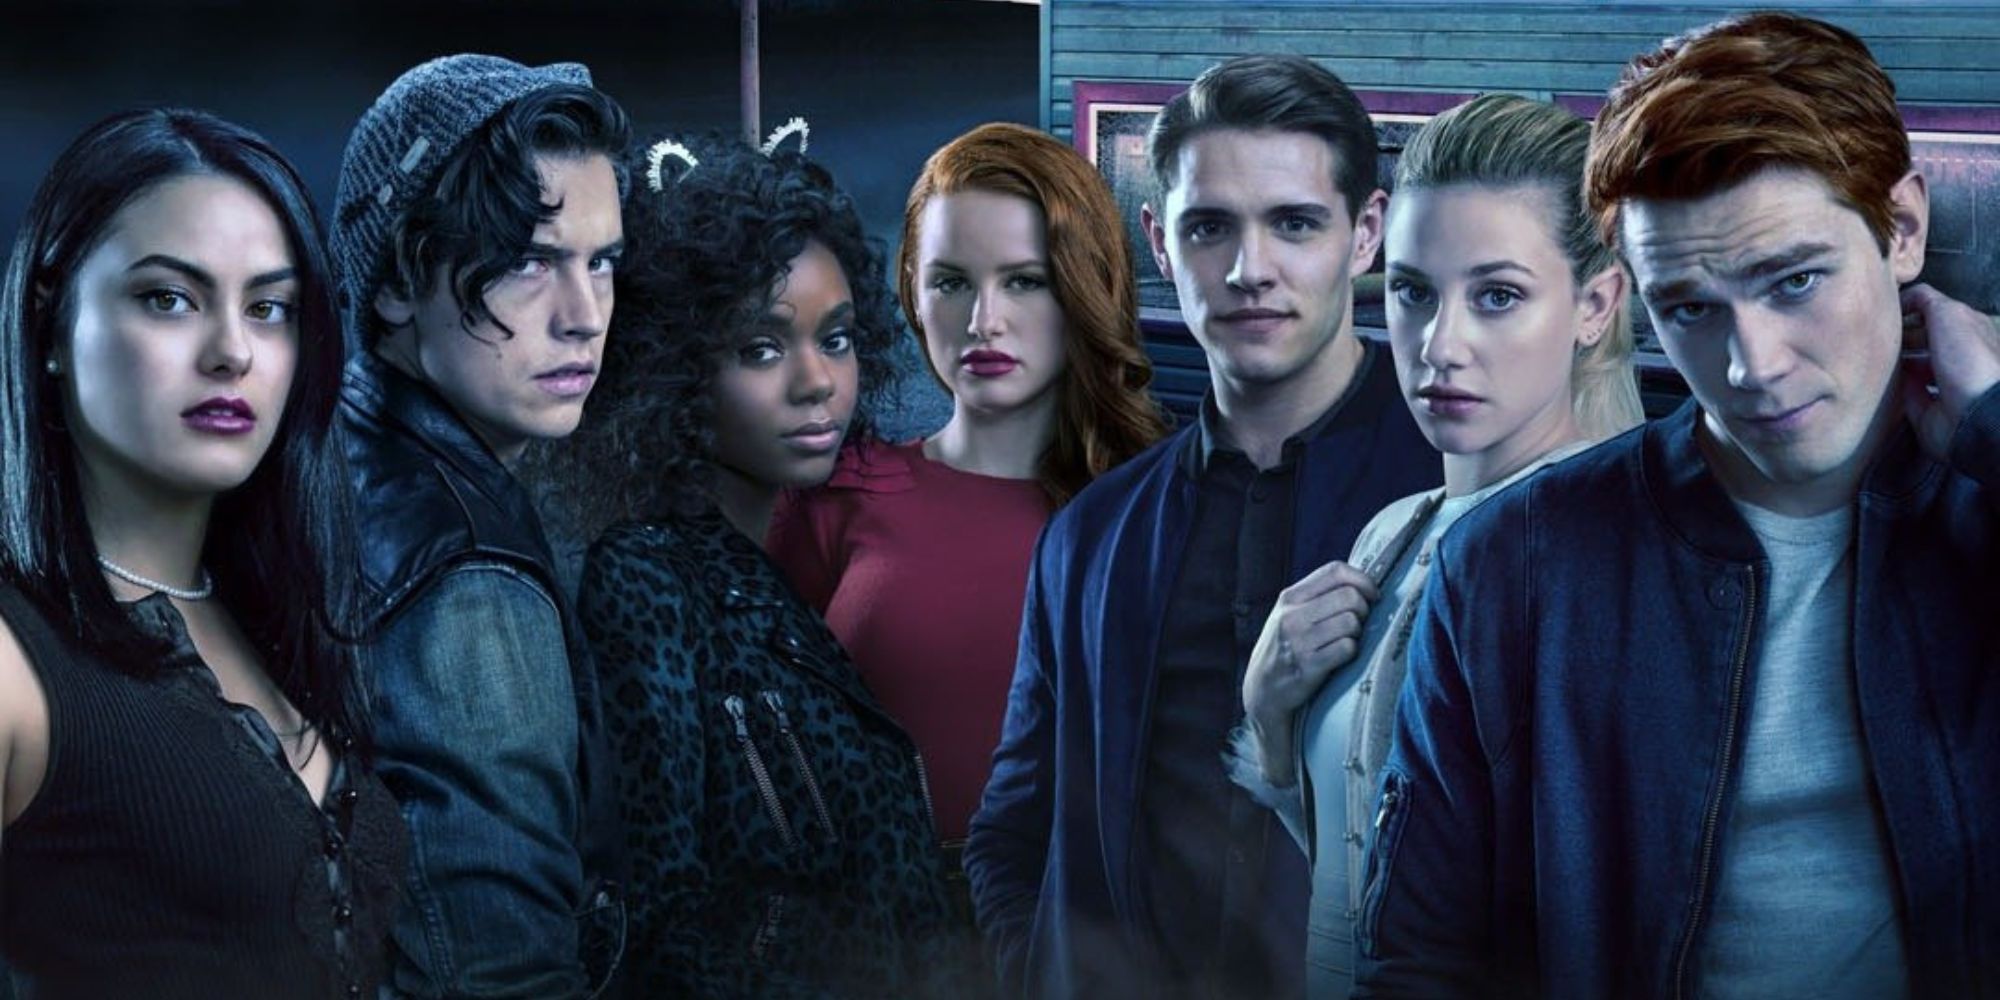 The cast of Riverdale standing together